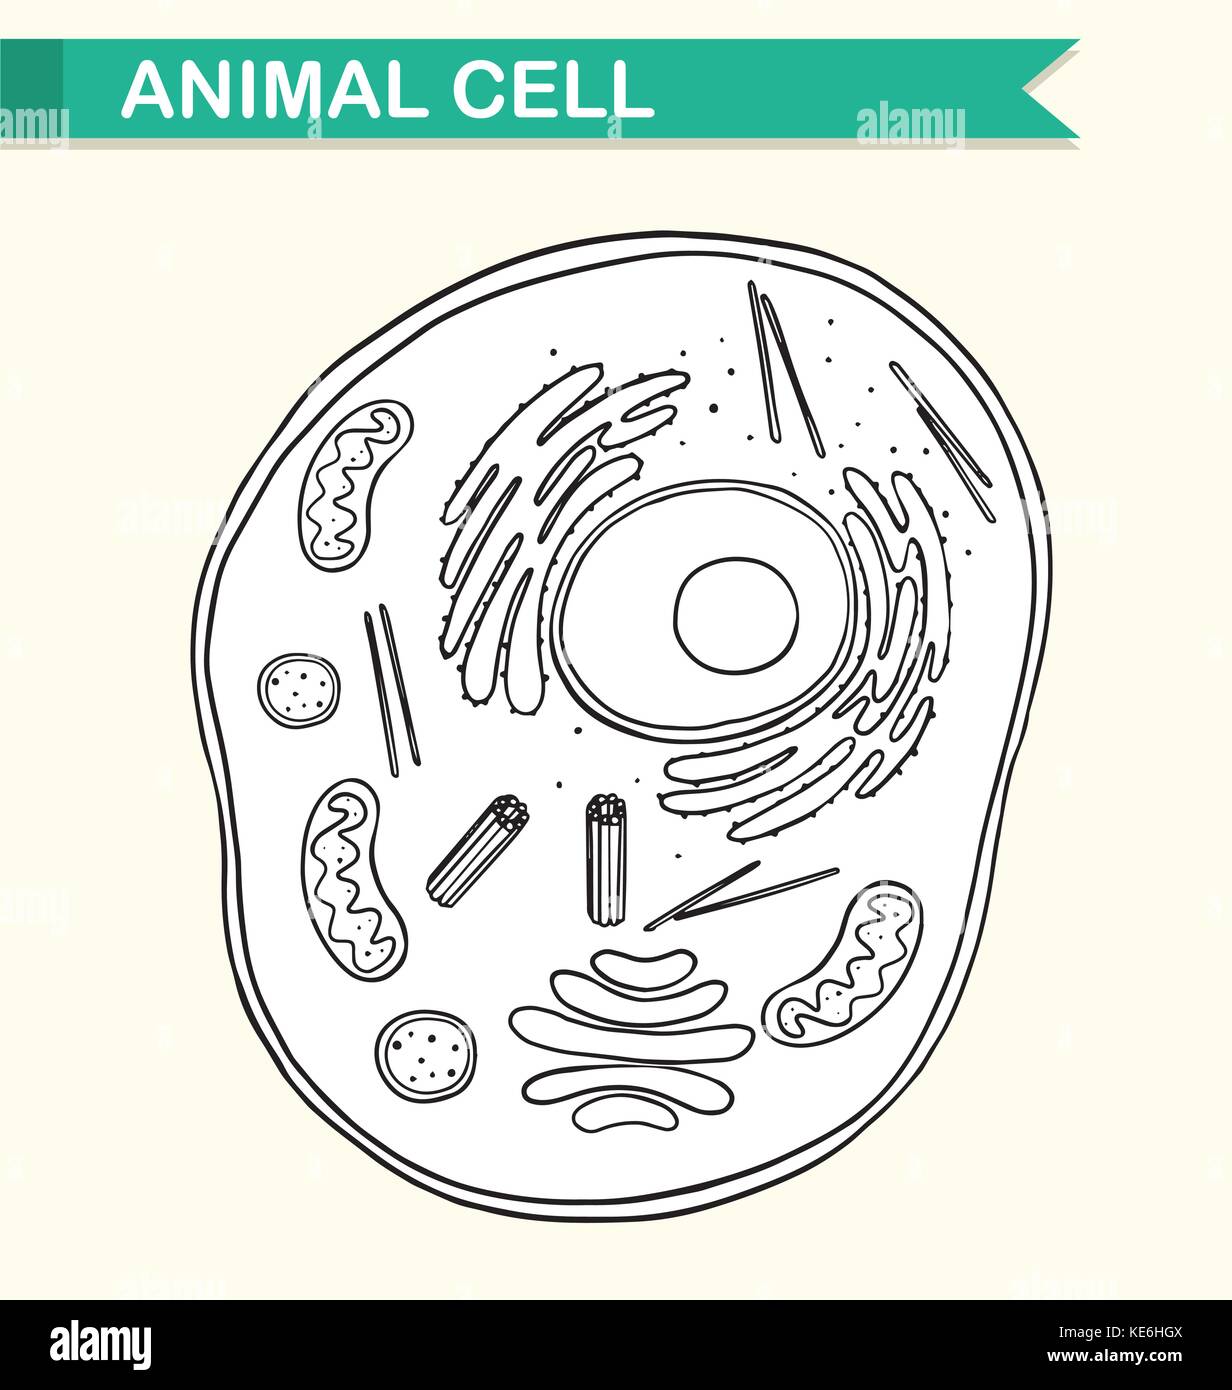 Diagram showing animal cell illustration Stock Vector Image & Art - Alamy